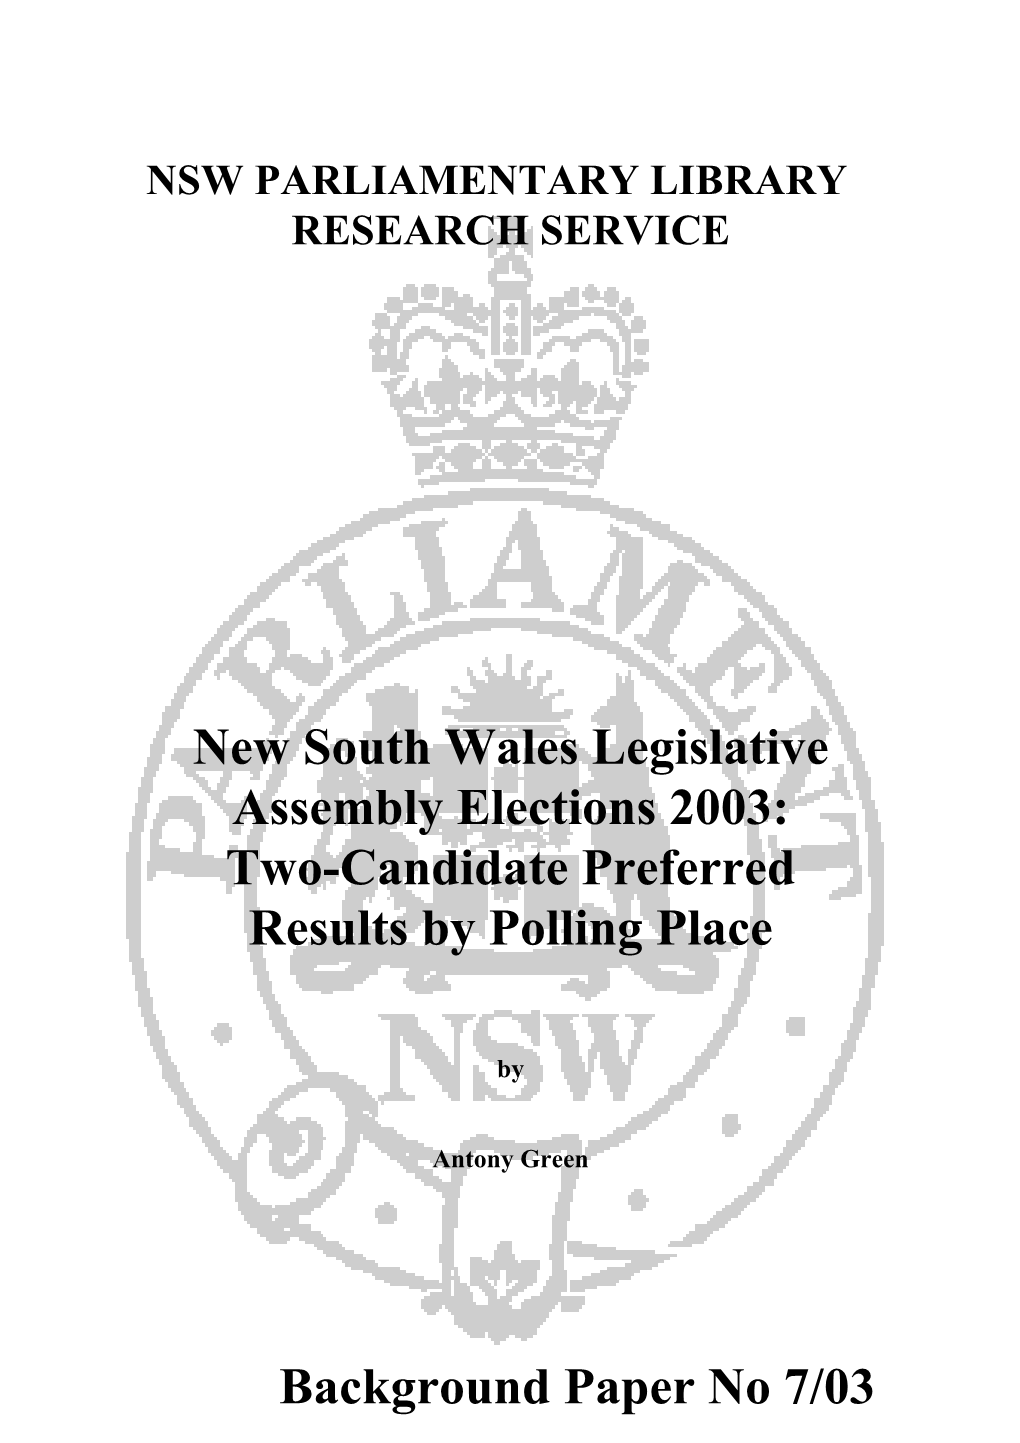 New South Wales Legislative Assembly Elections 2003: Two-Candidate Preferred